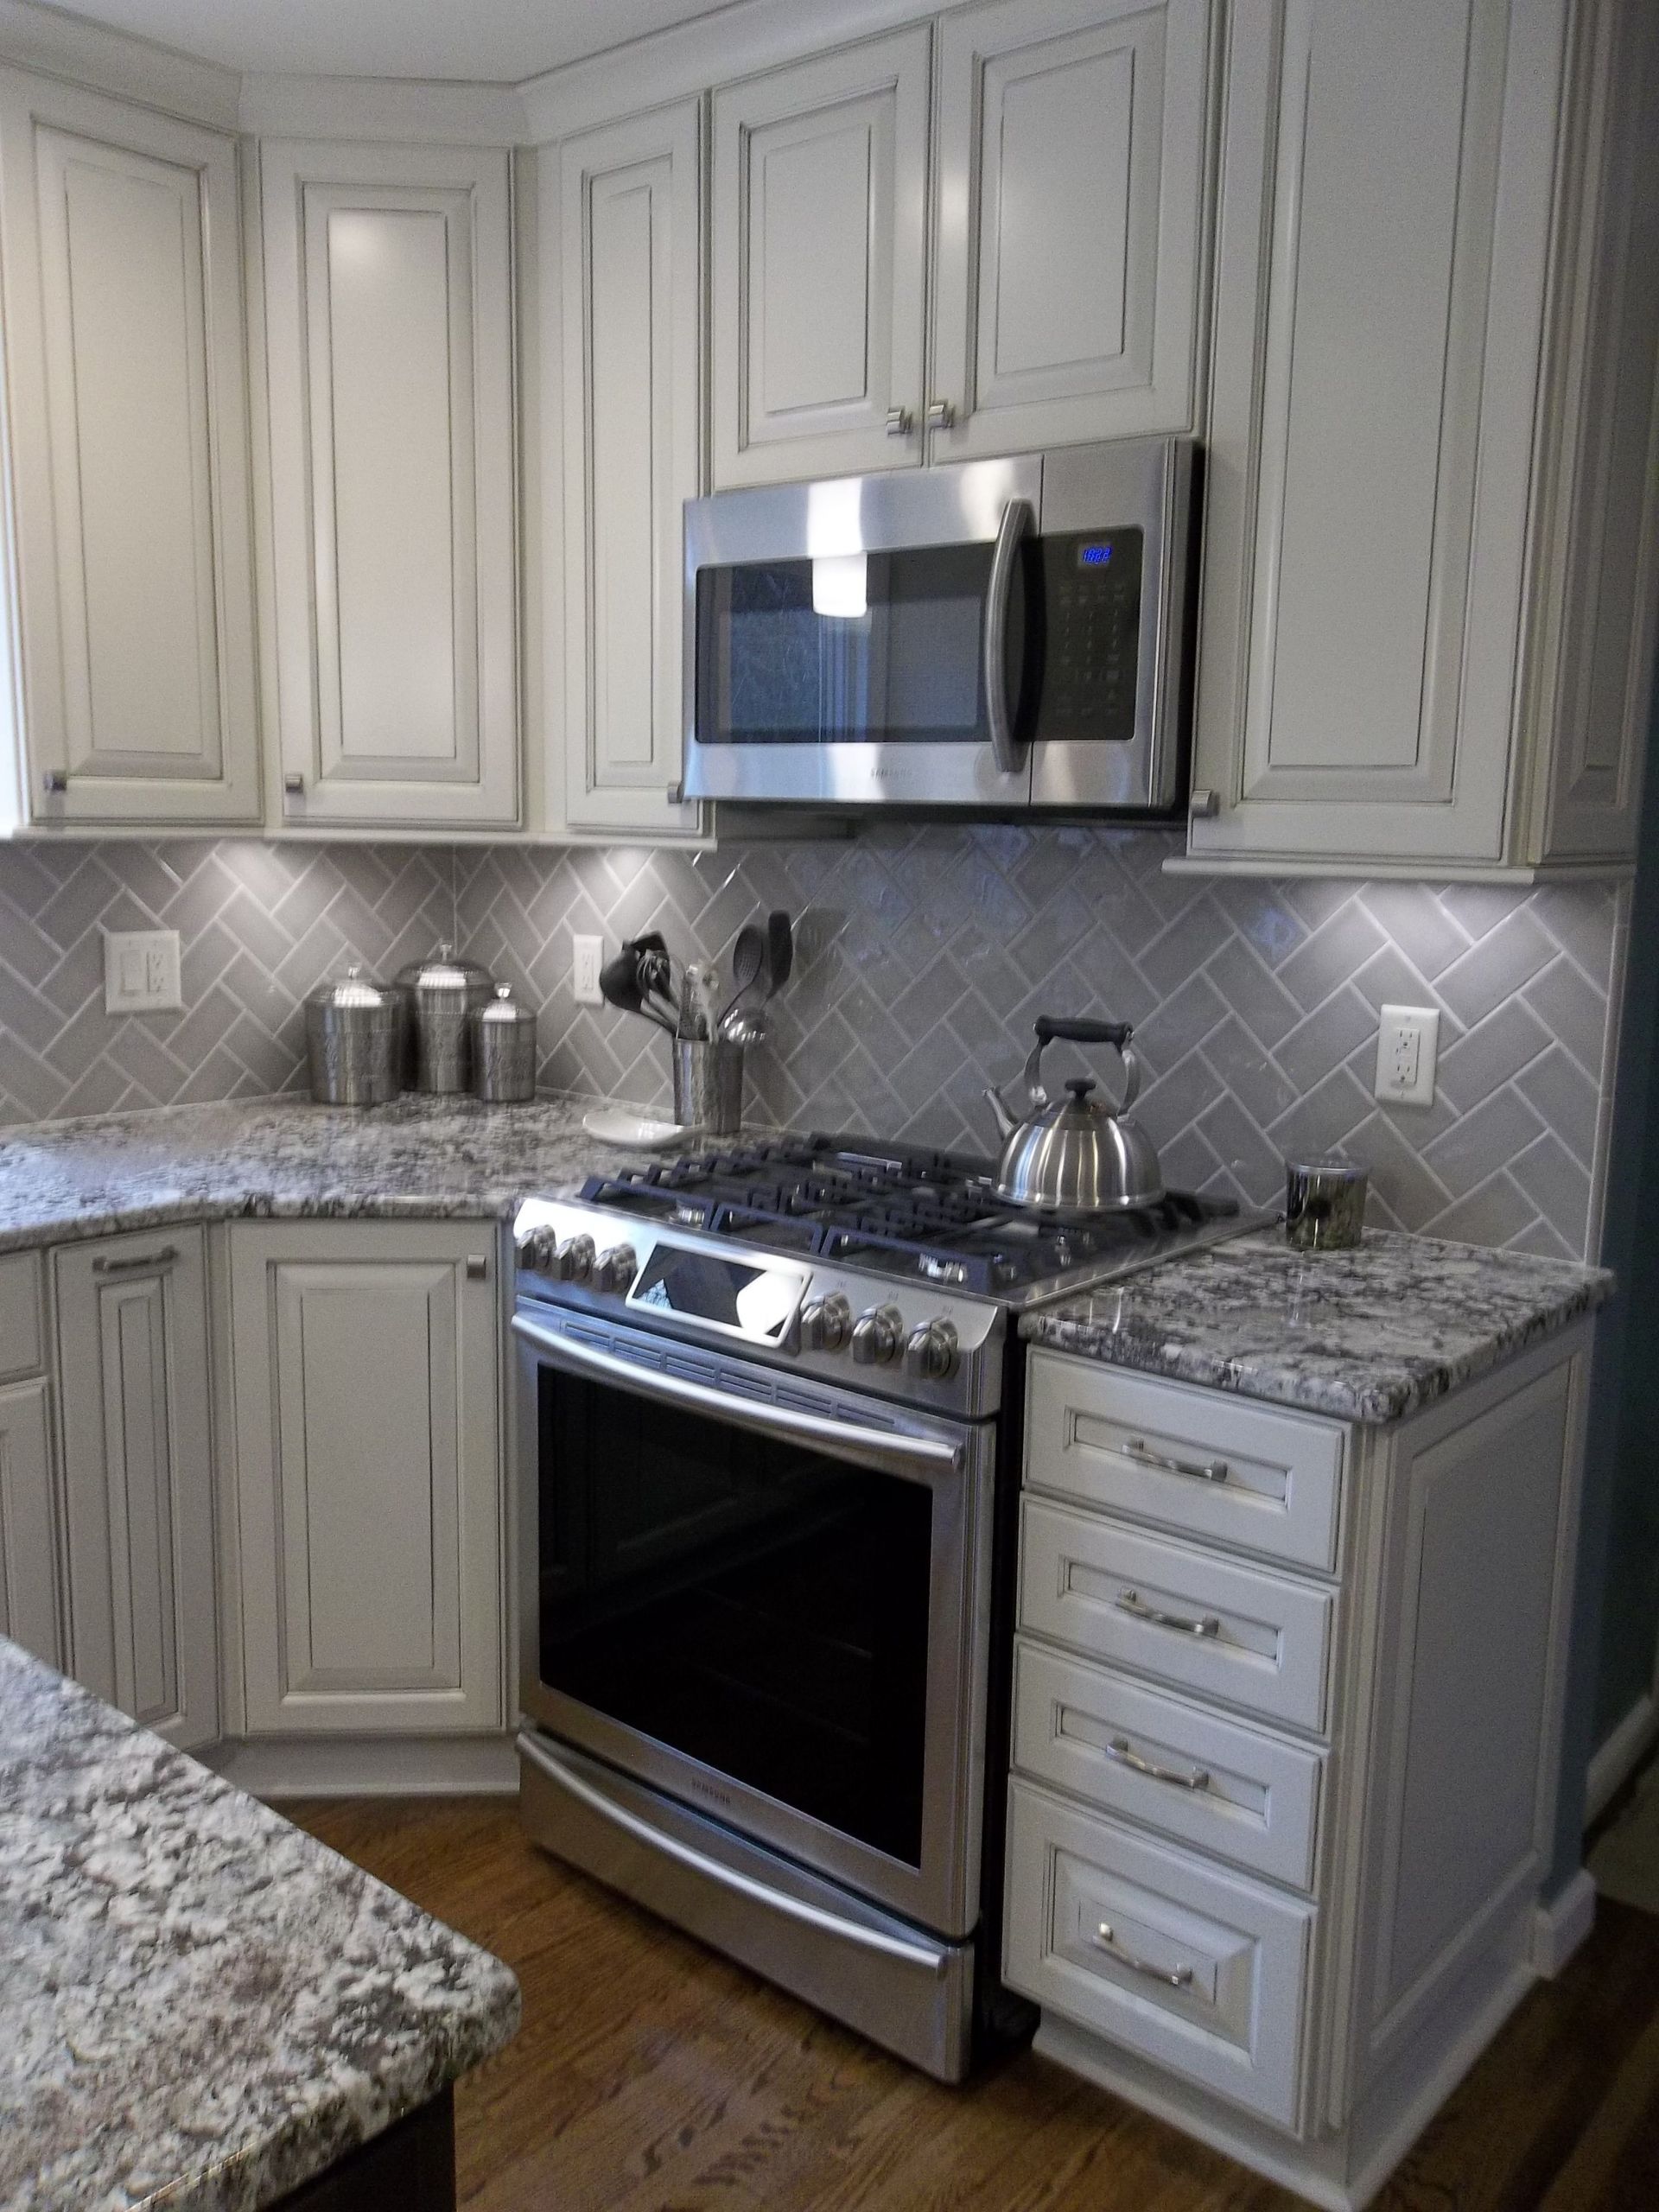 Lowes Kitchen Wall Cabinets
 Check out this beautiful kitchen remodel pleted by Lowe